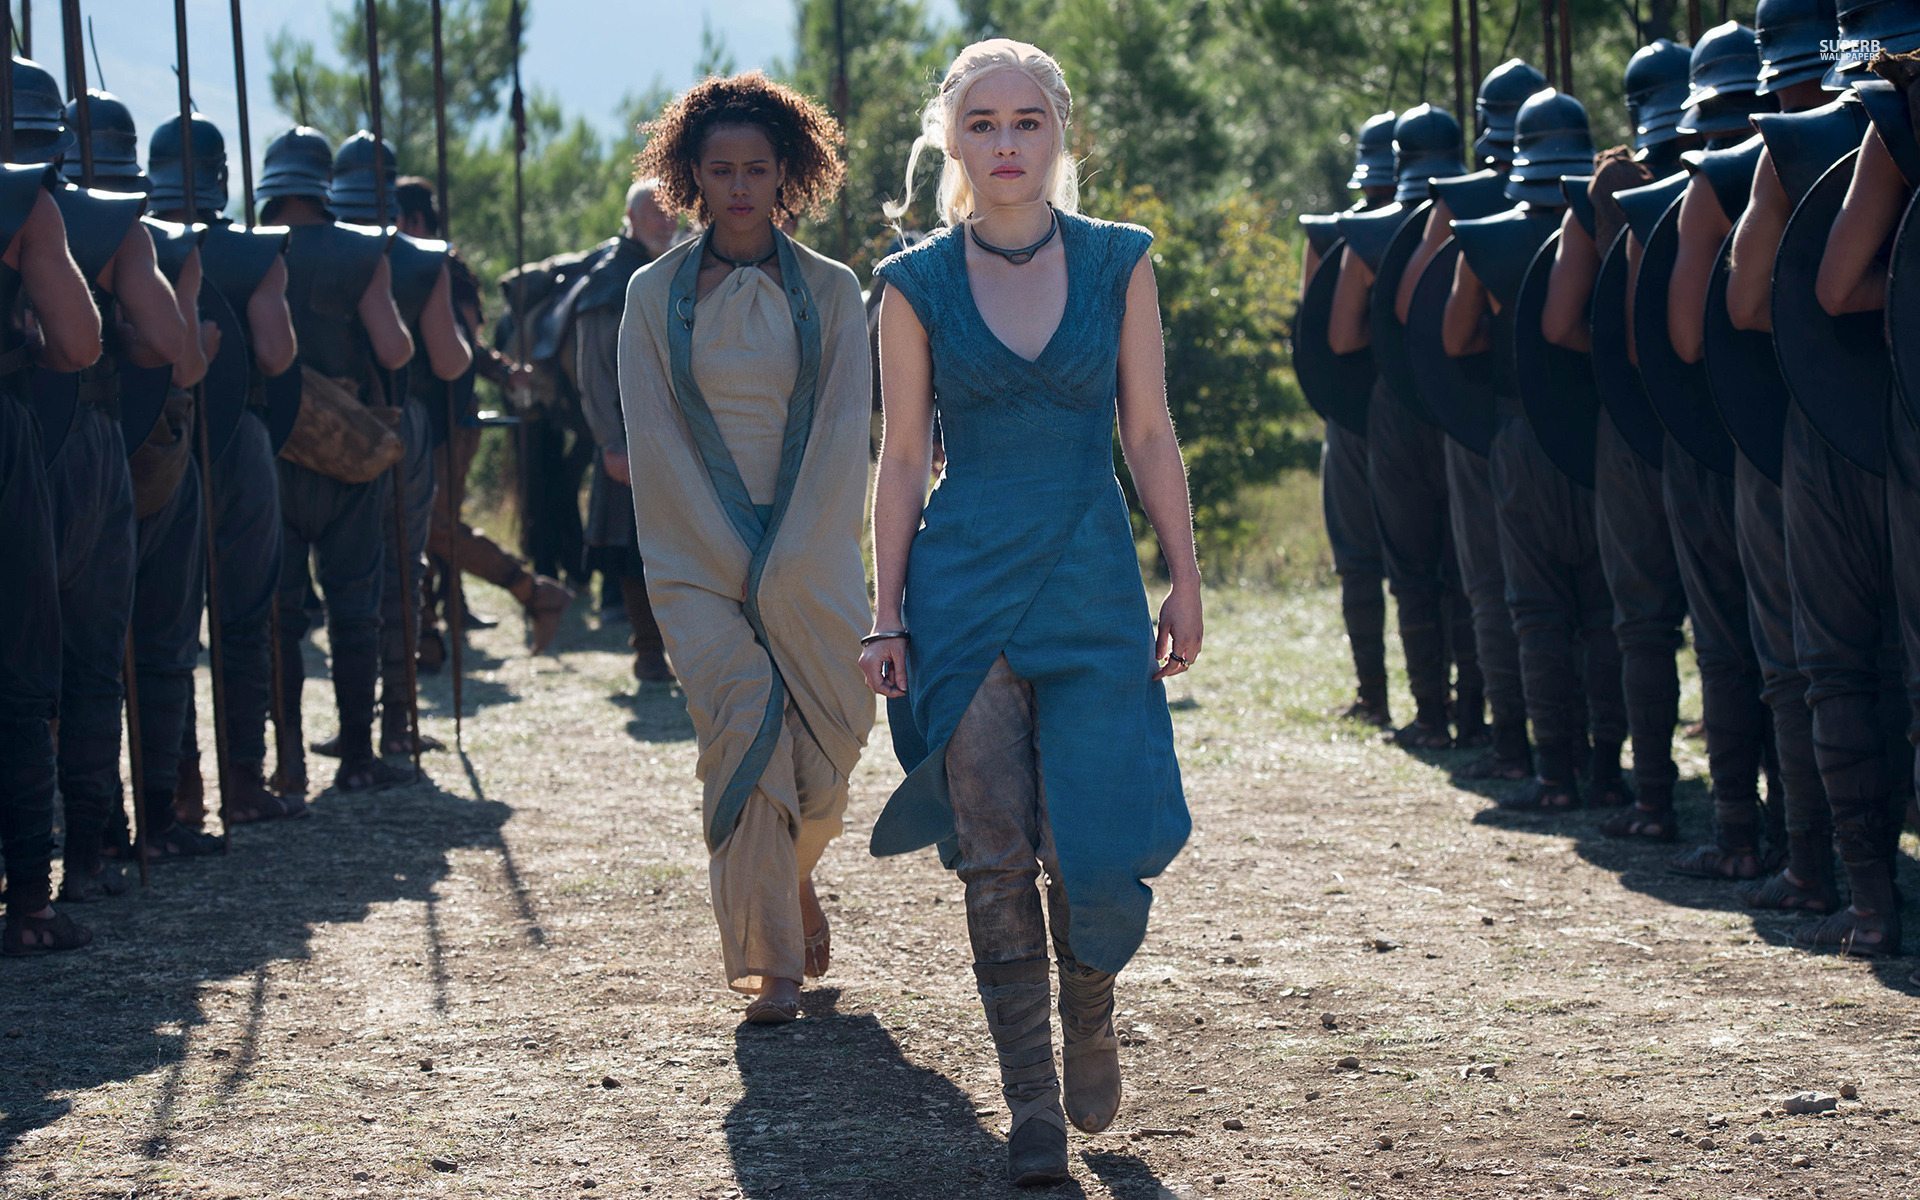 daenerys-and-missandei-game-of-thrones-31179-1920x1200